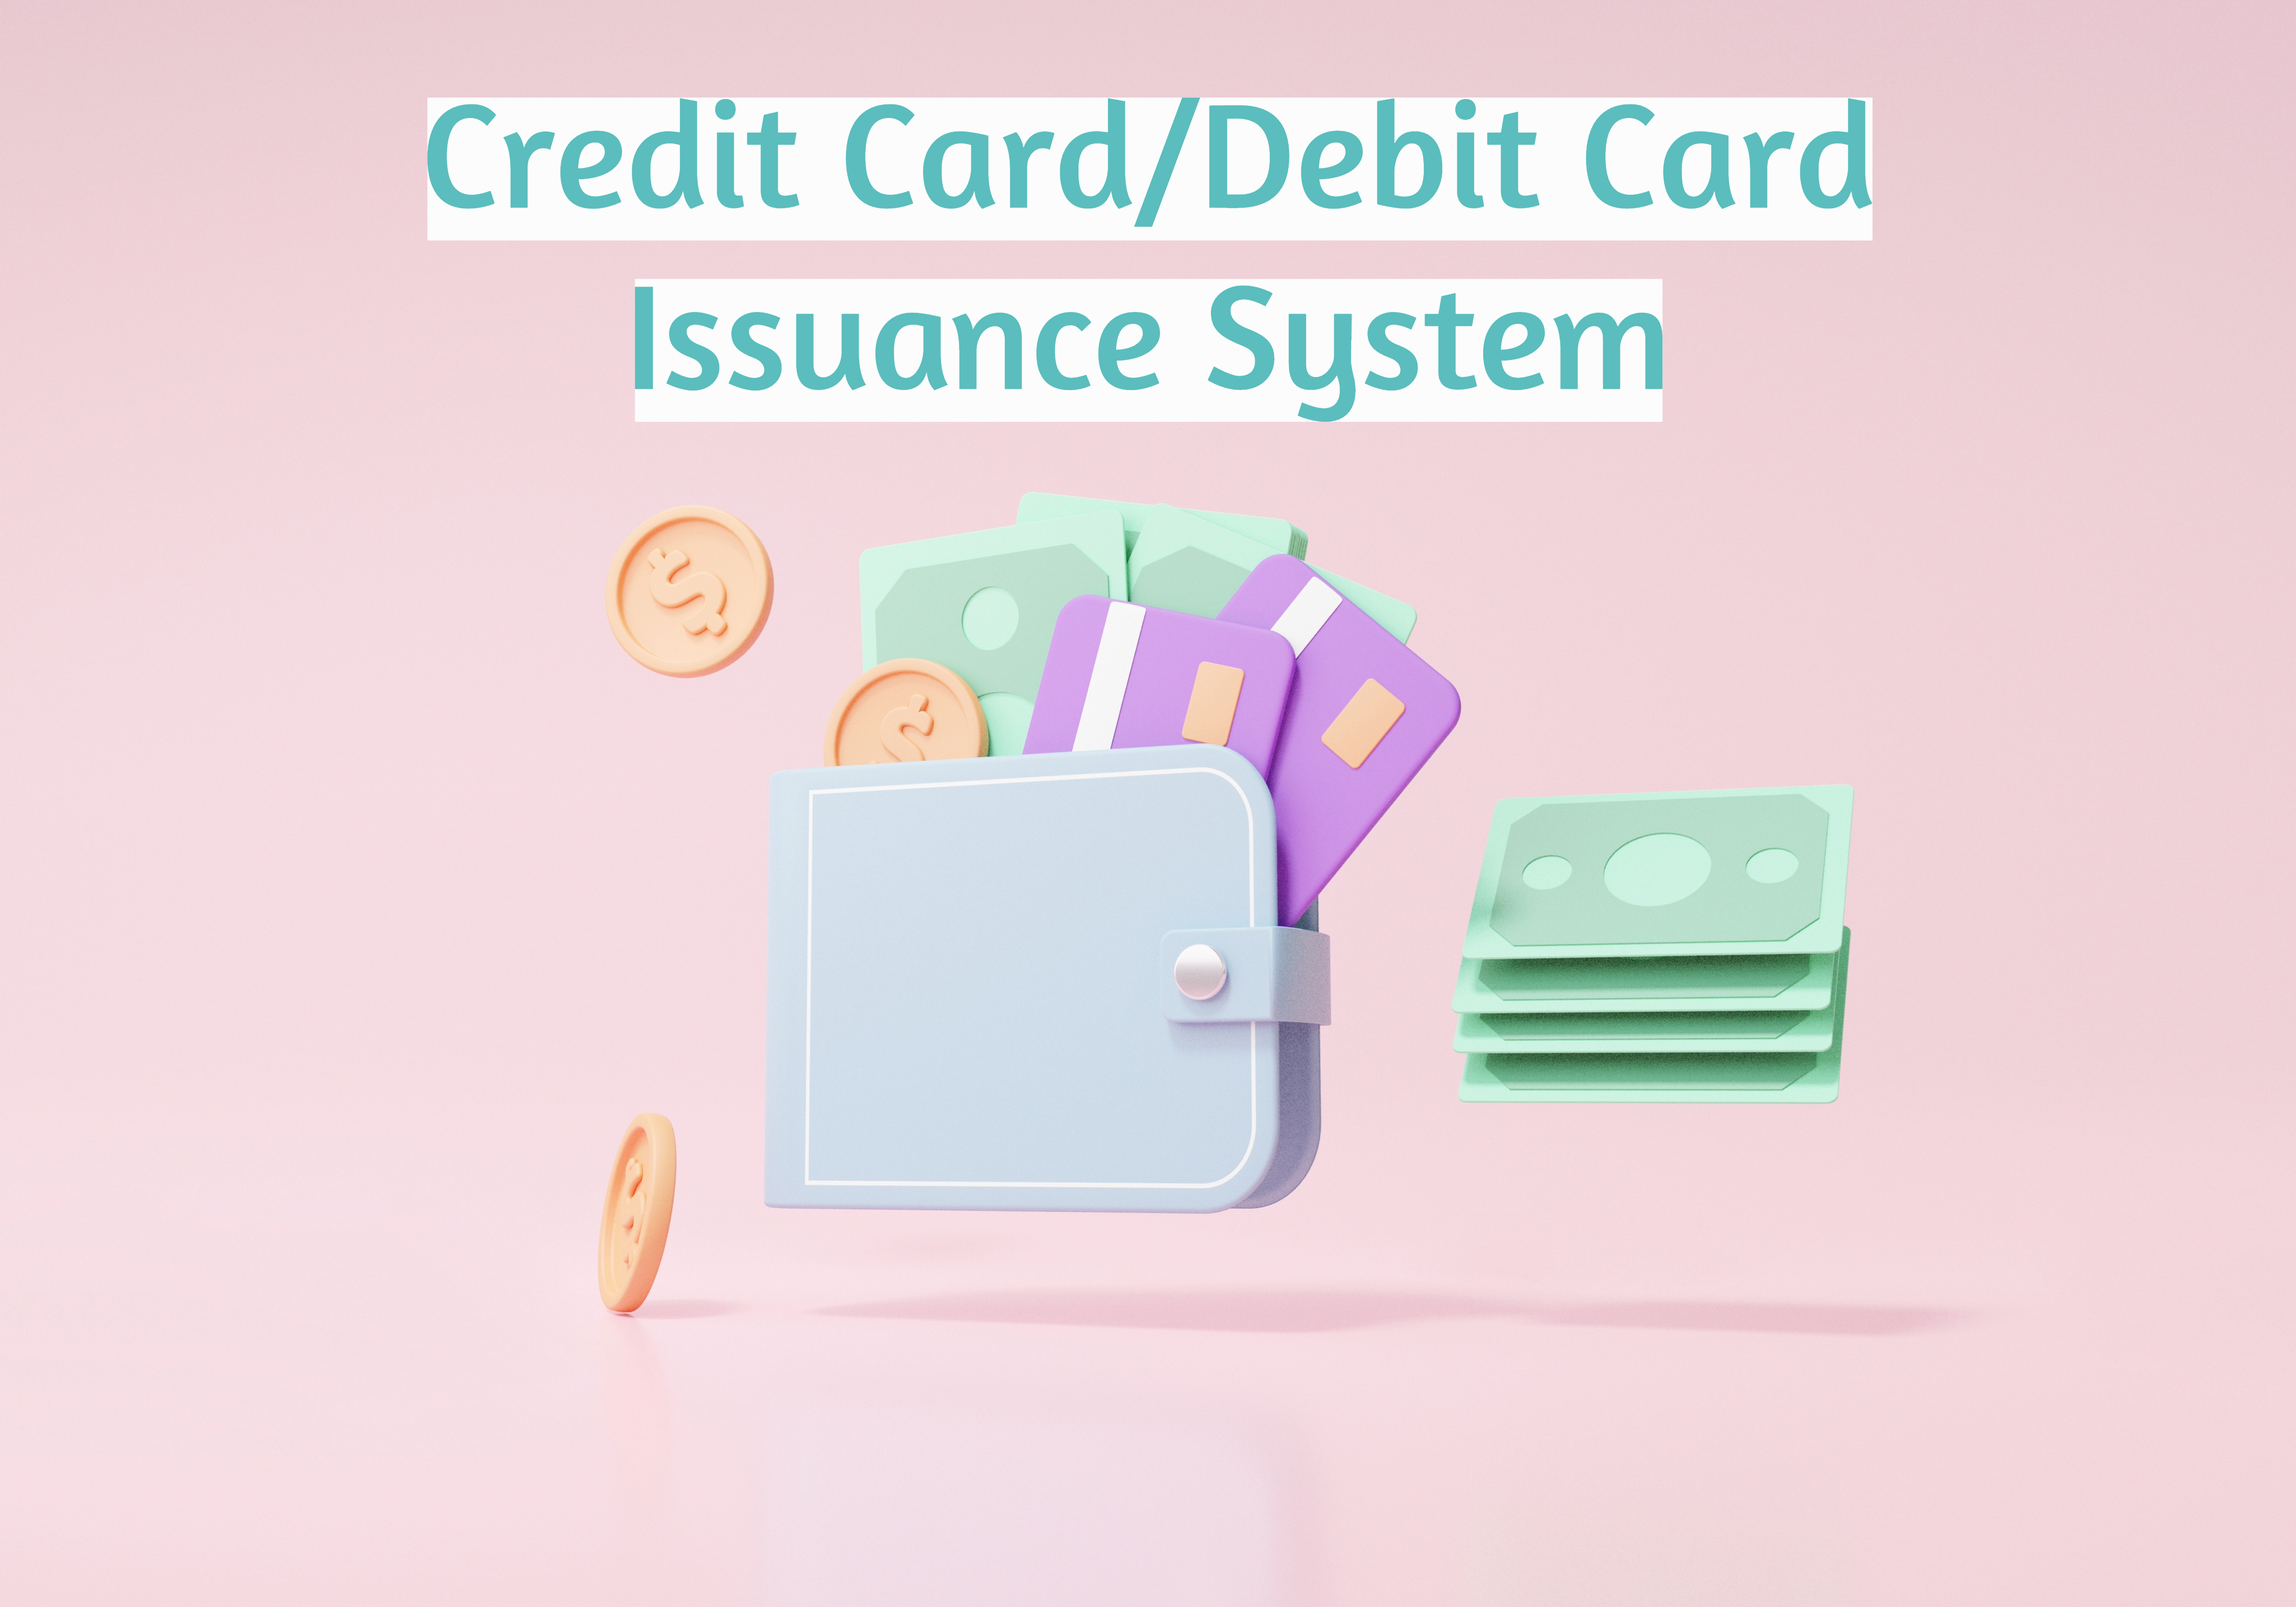 Credit/Debit Card Issuance System